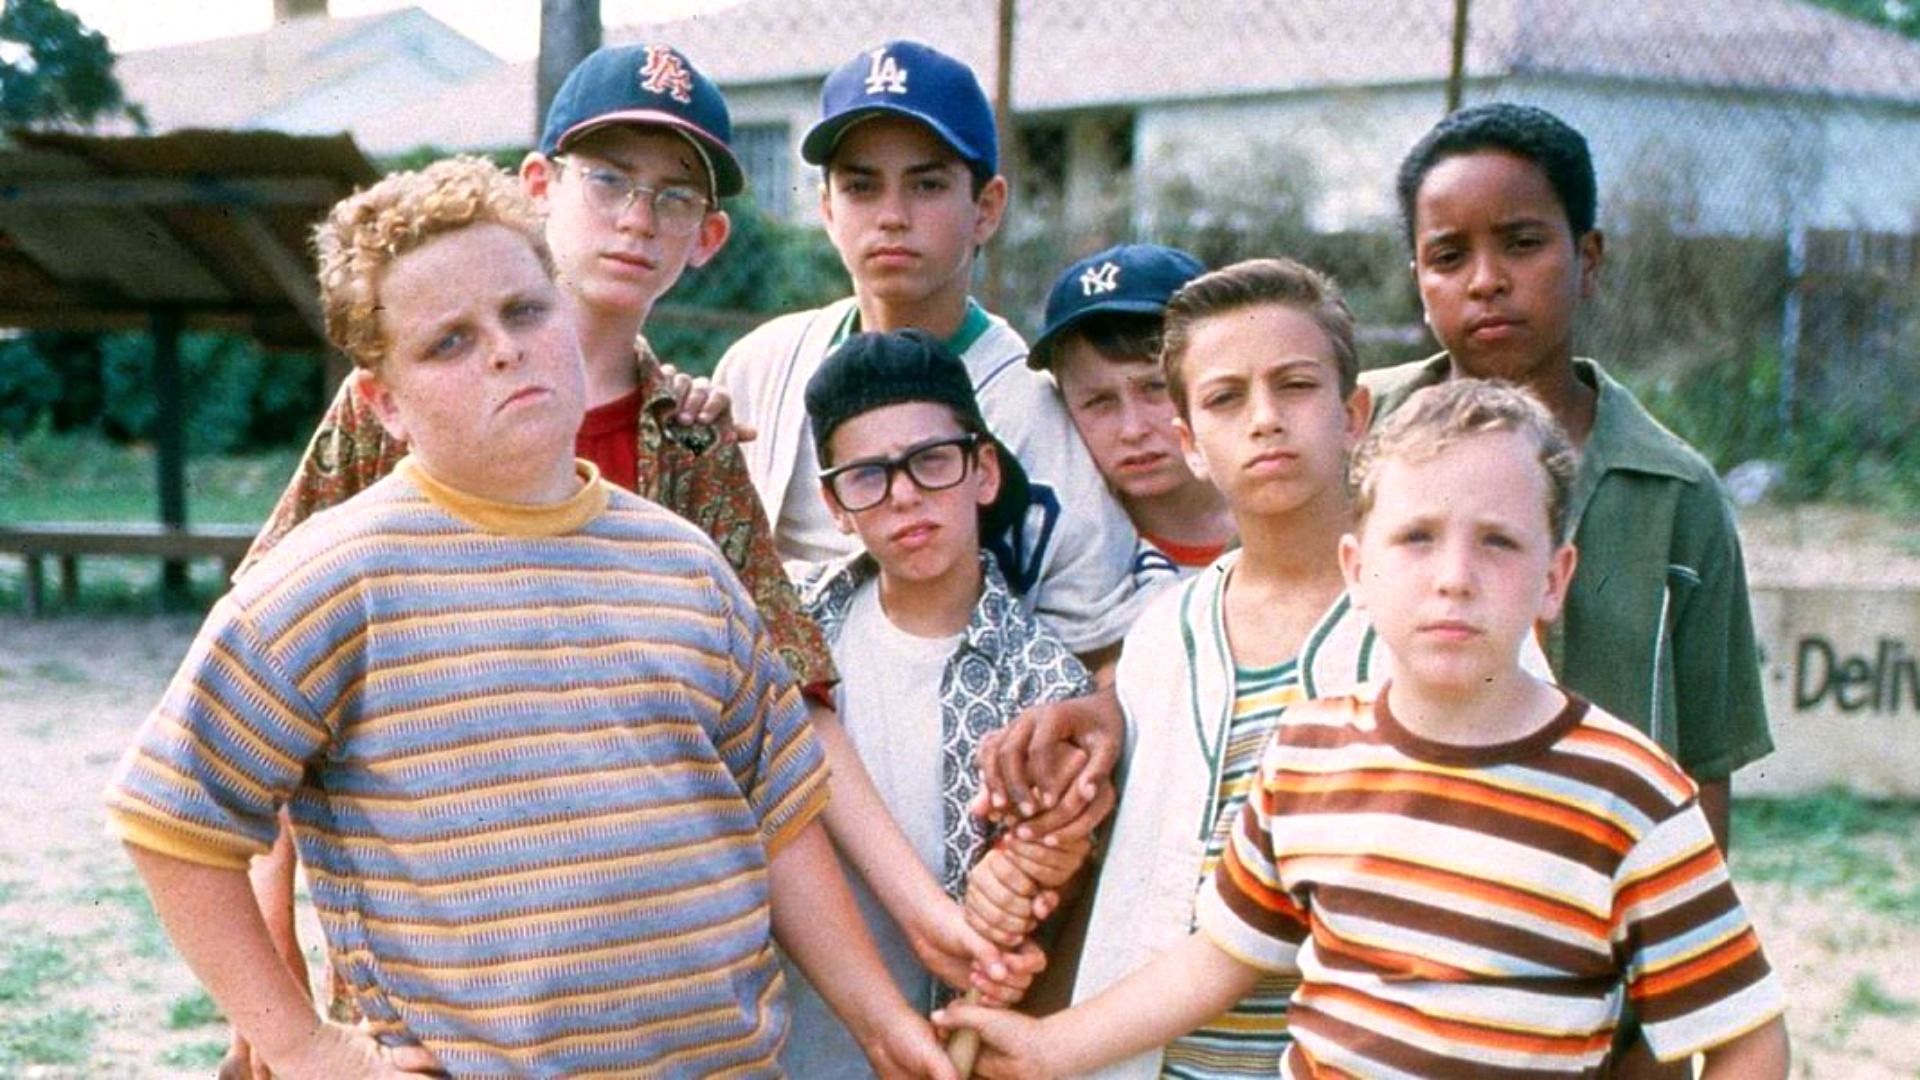 WTF Happened to the Boys From 'The Sandlot'?